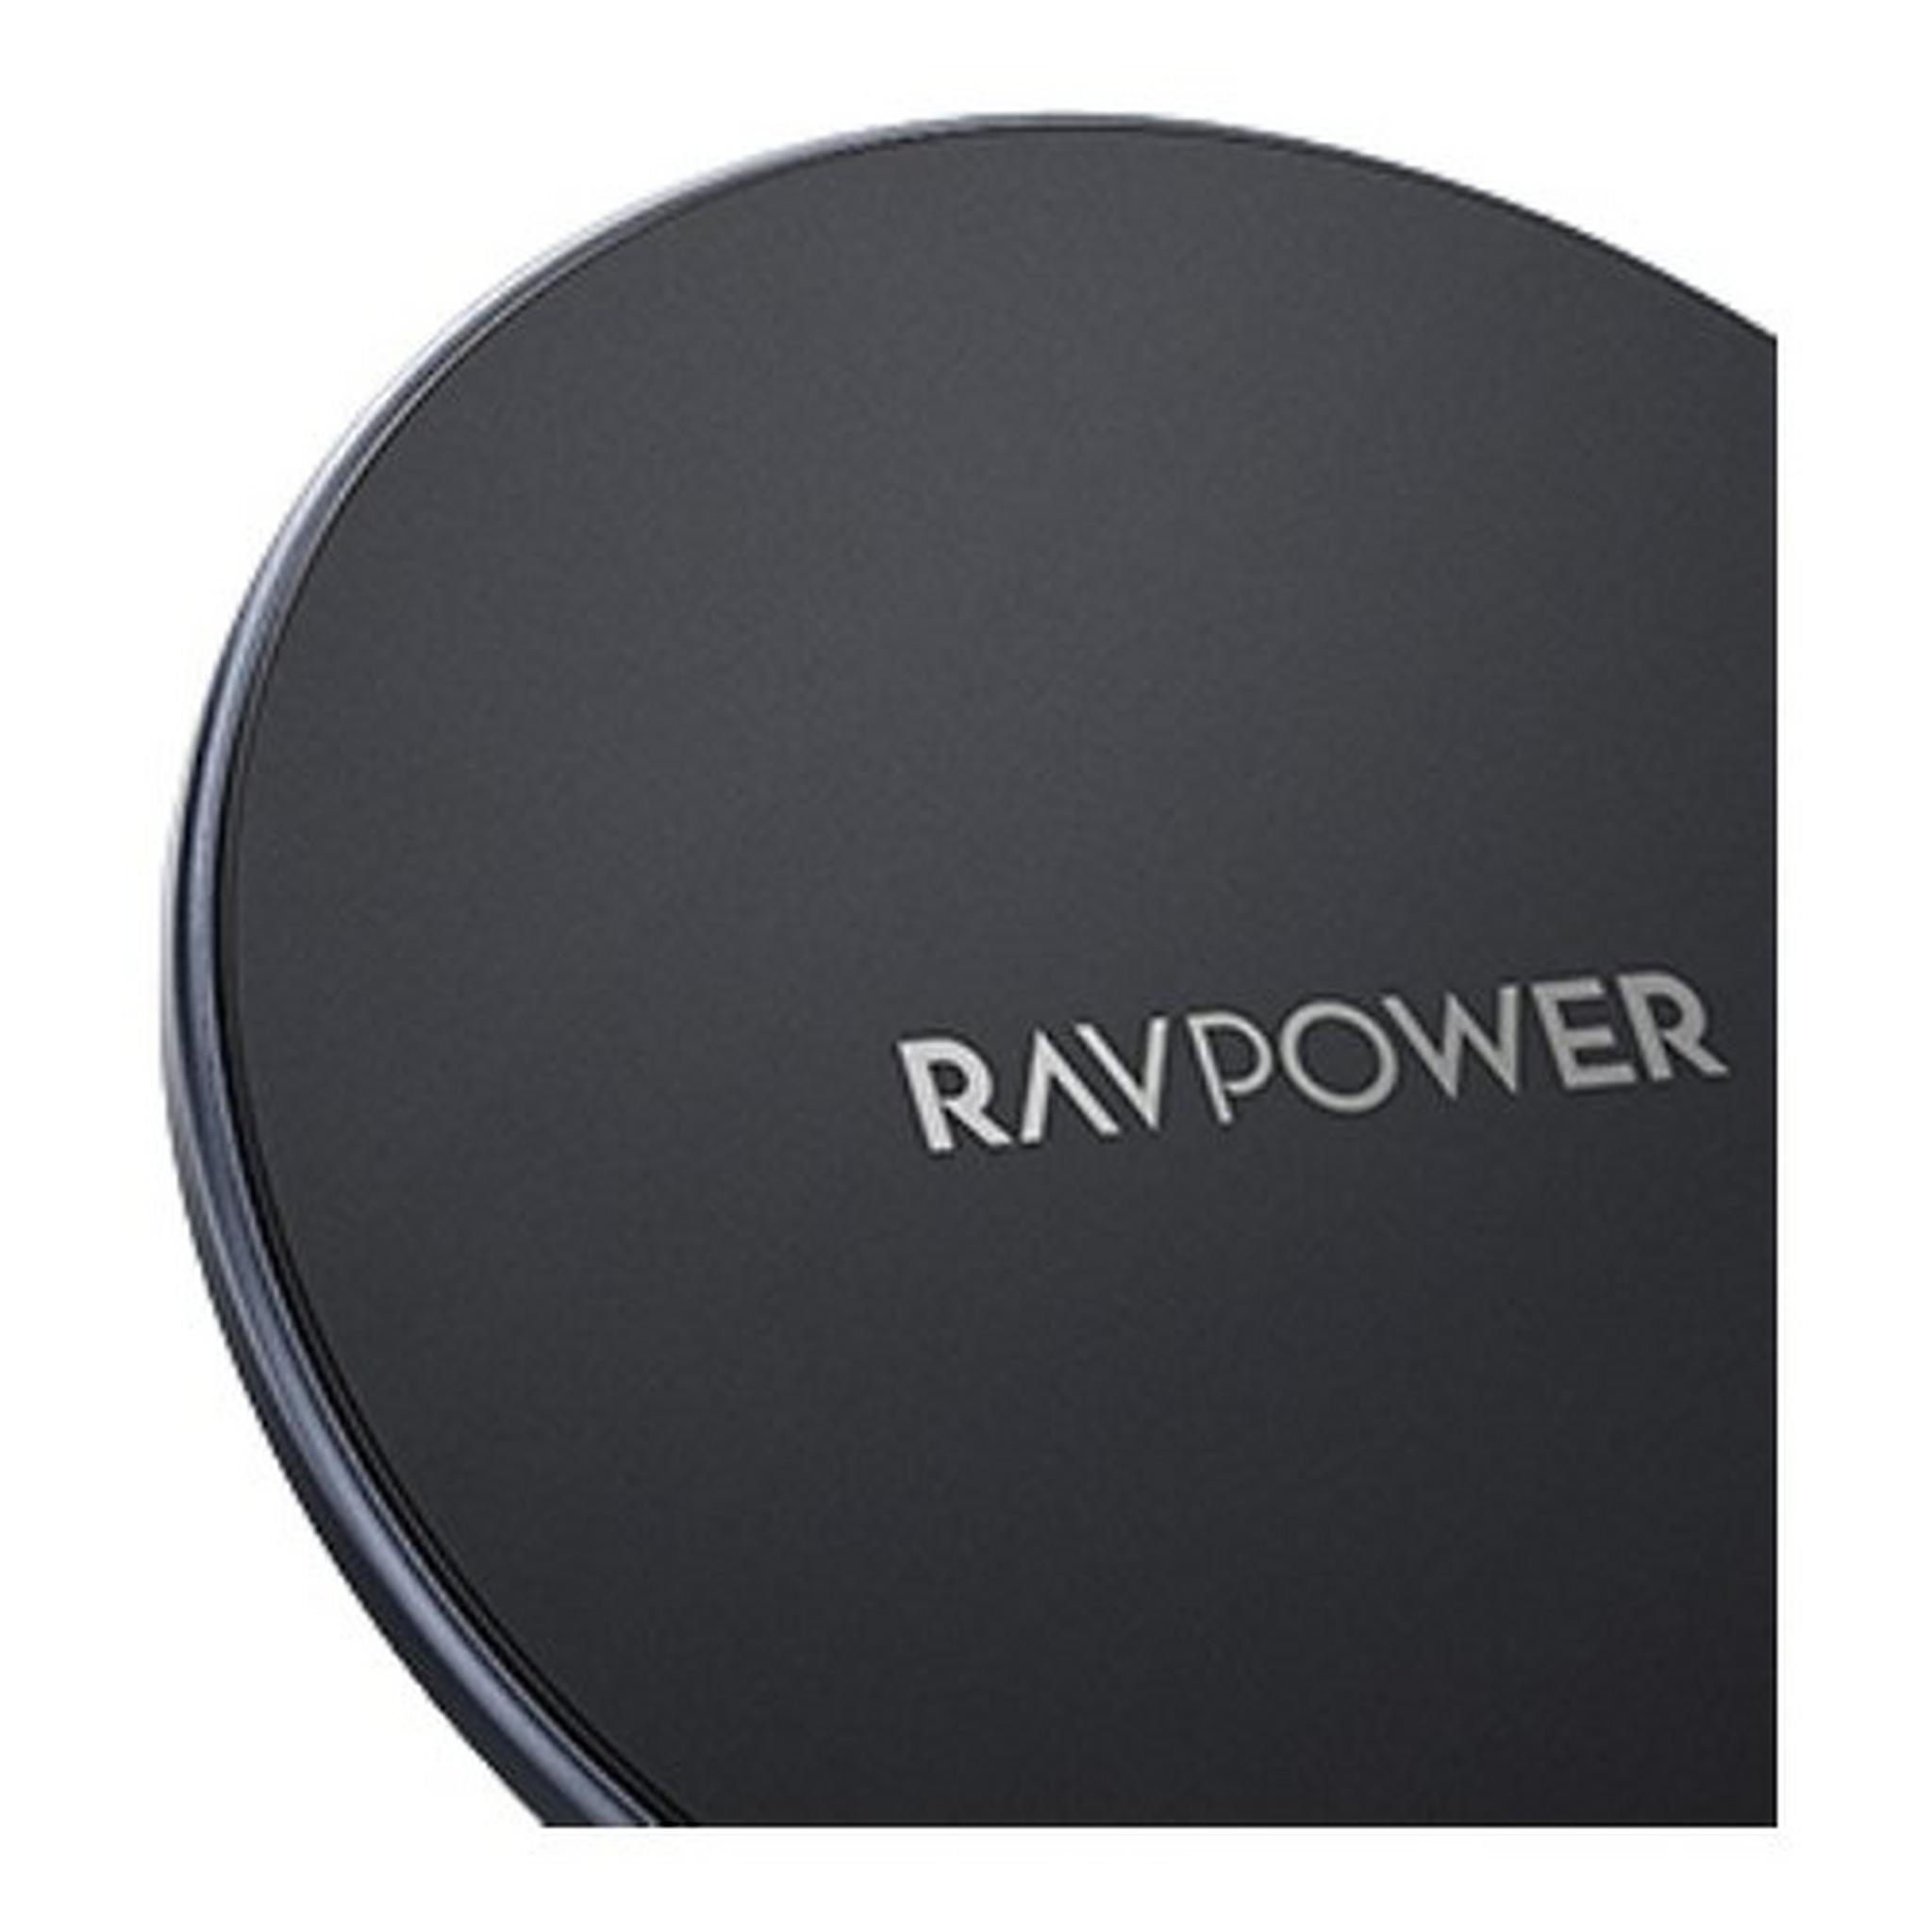 RAVPower Magnetic Wireless Charger (RP-WC012)